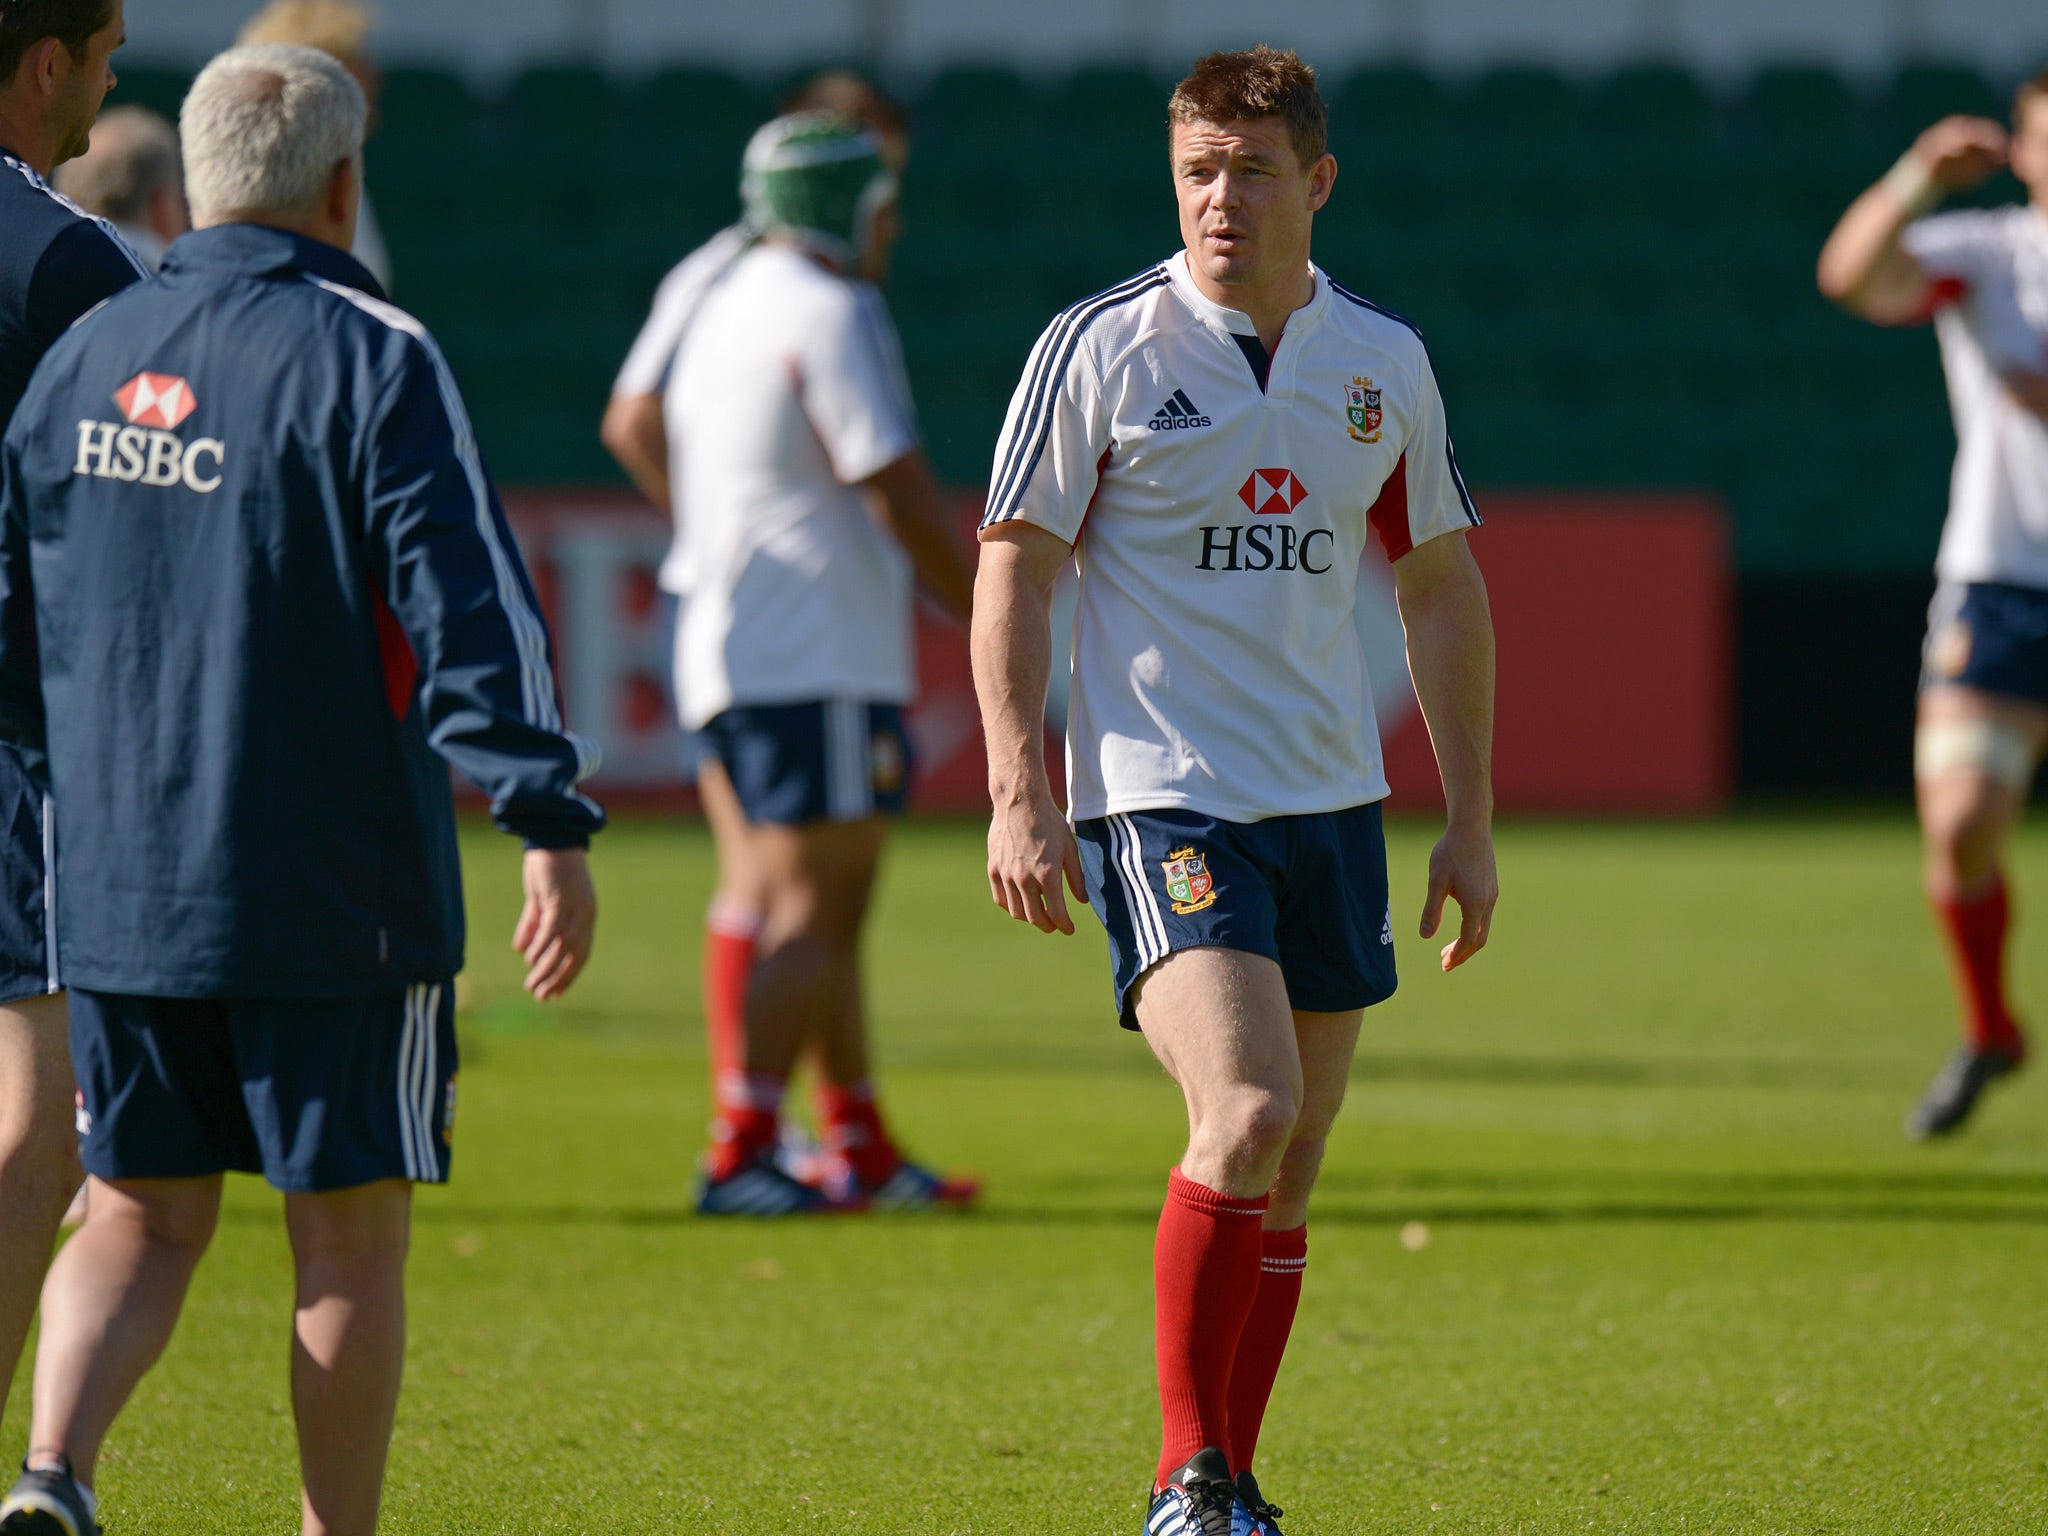 Brian O'Driscoll (C) of the British and Irish Lions rugby team speaks to coach Warren Gatland (L) during the captain's run in Perth on June 4, 2013